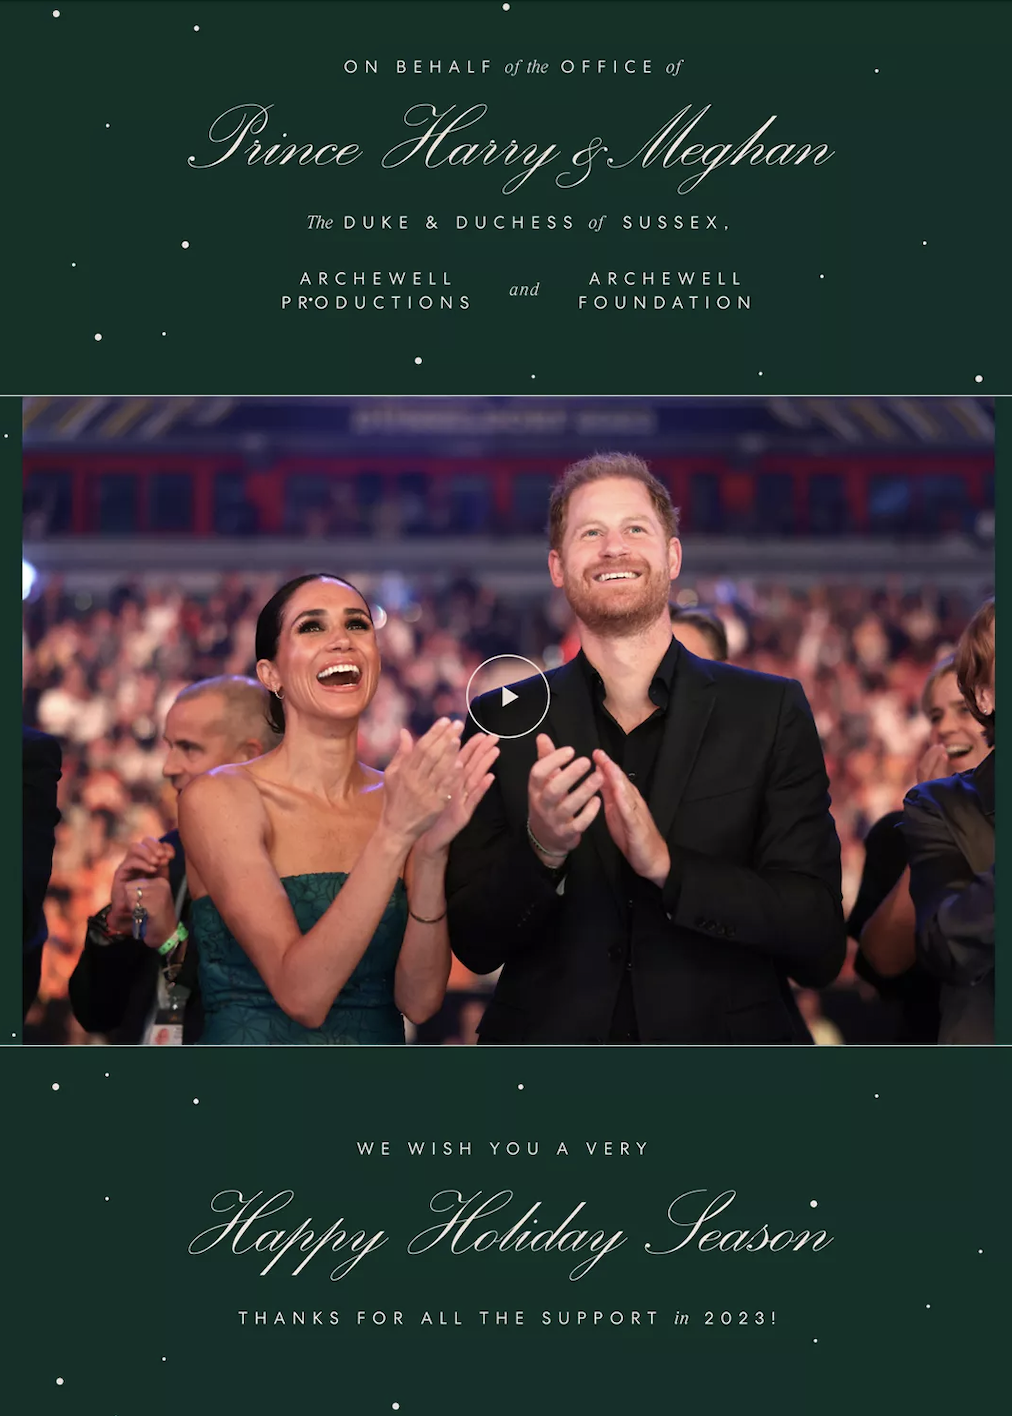 No kids and a Christmas tree: what Prince Harry and Meghan Markle's ''losers of the year'' Christmas card looks like